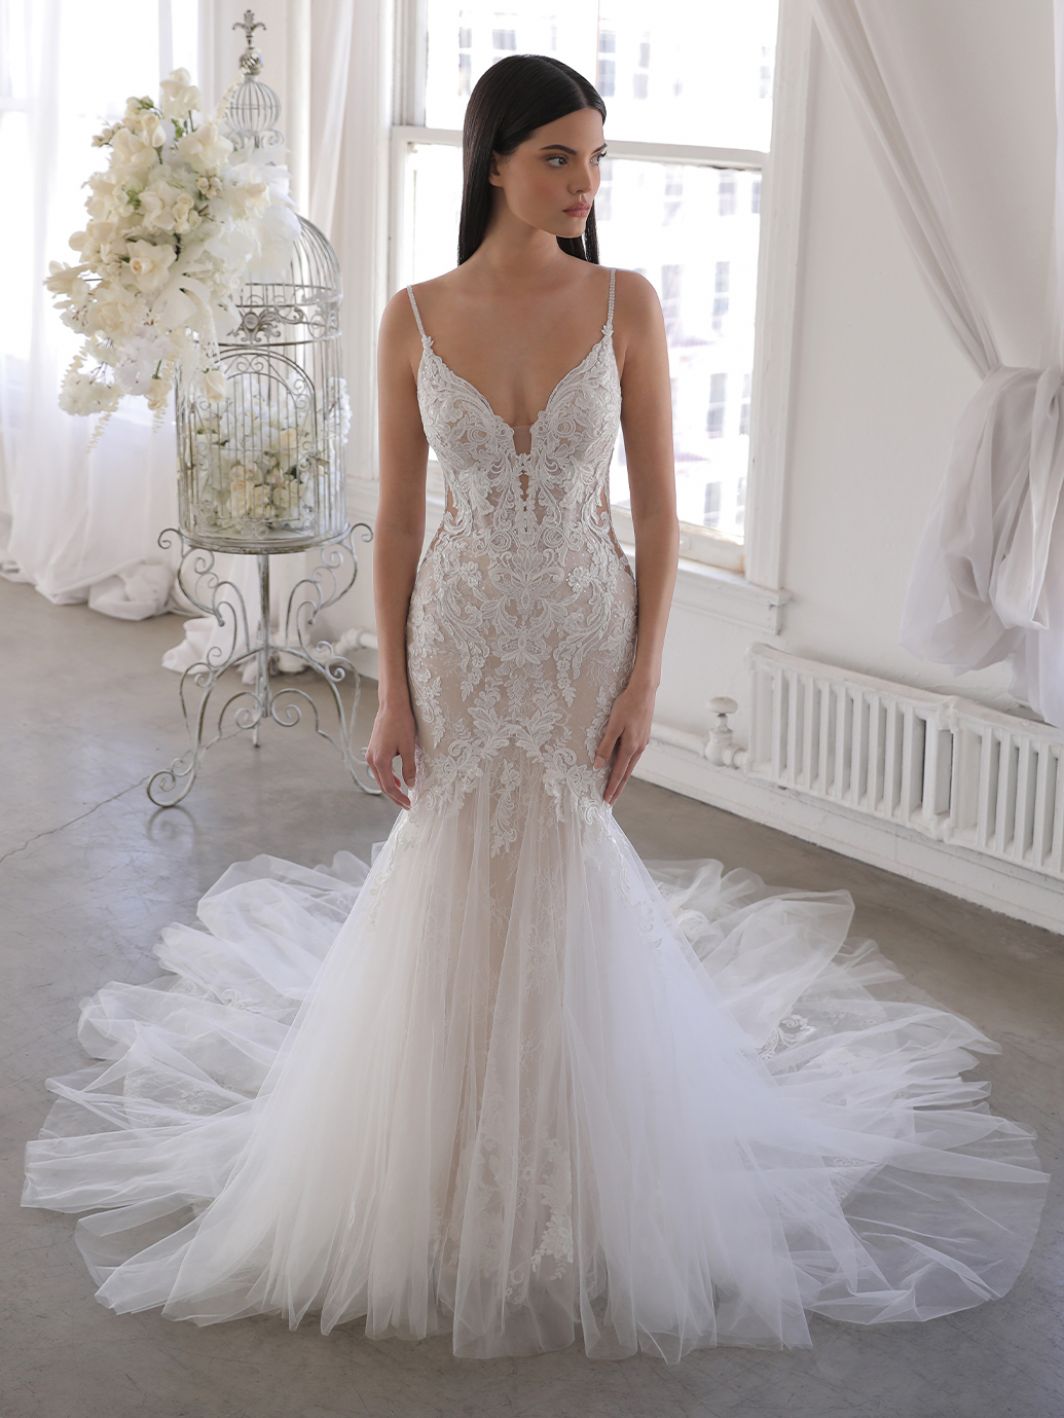 Romantic Mermaid Bridal Dress With Chantilly Lace Oaklyn by Enzoani wedding dresses baltimore